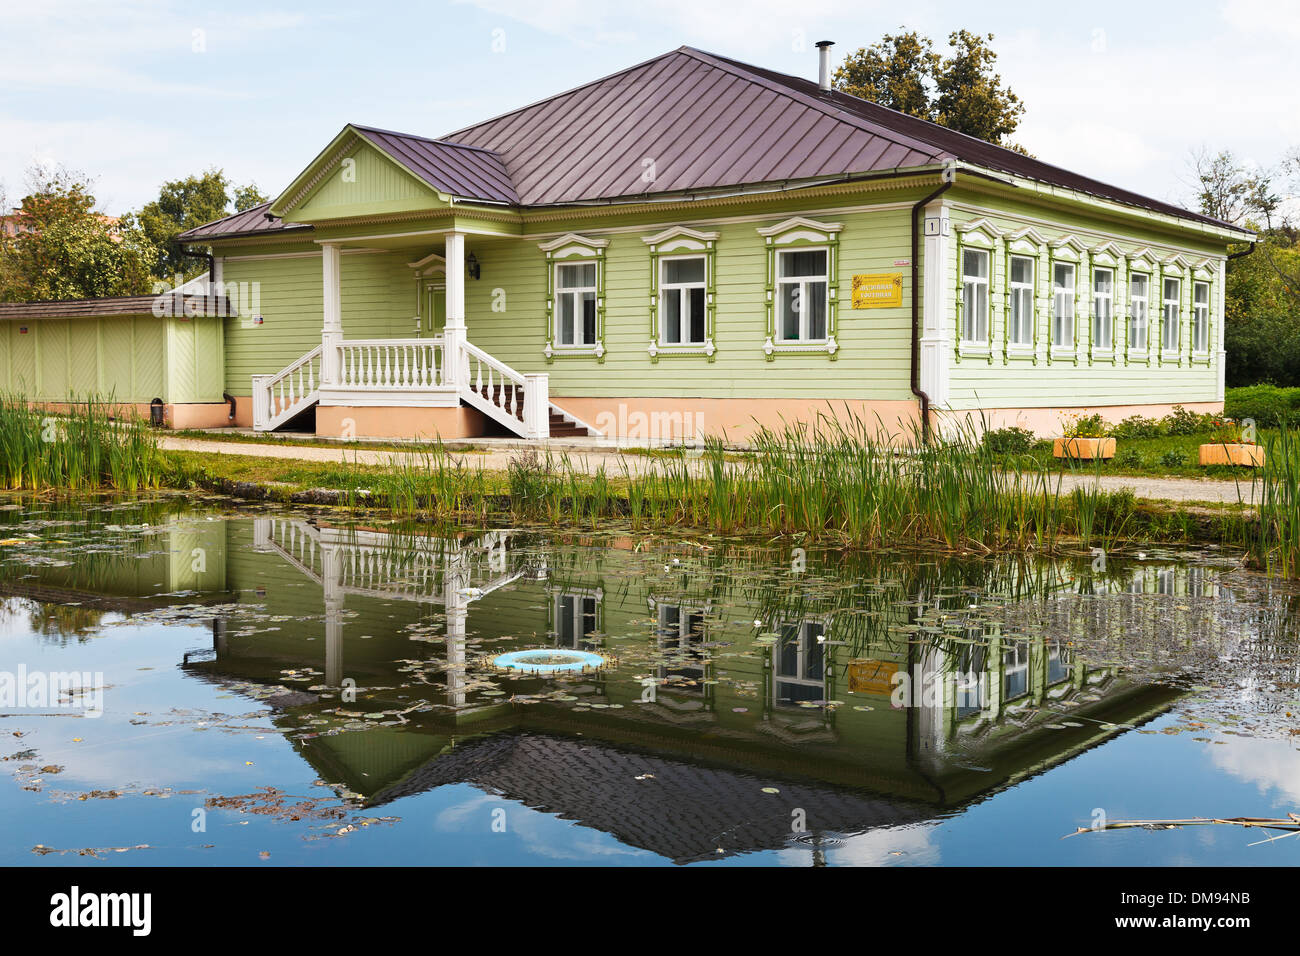 old russian wooden house of XIX century, Dmitrov, Russia Stock Photo